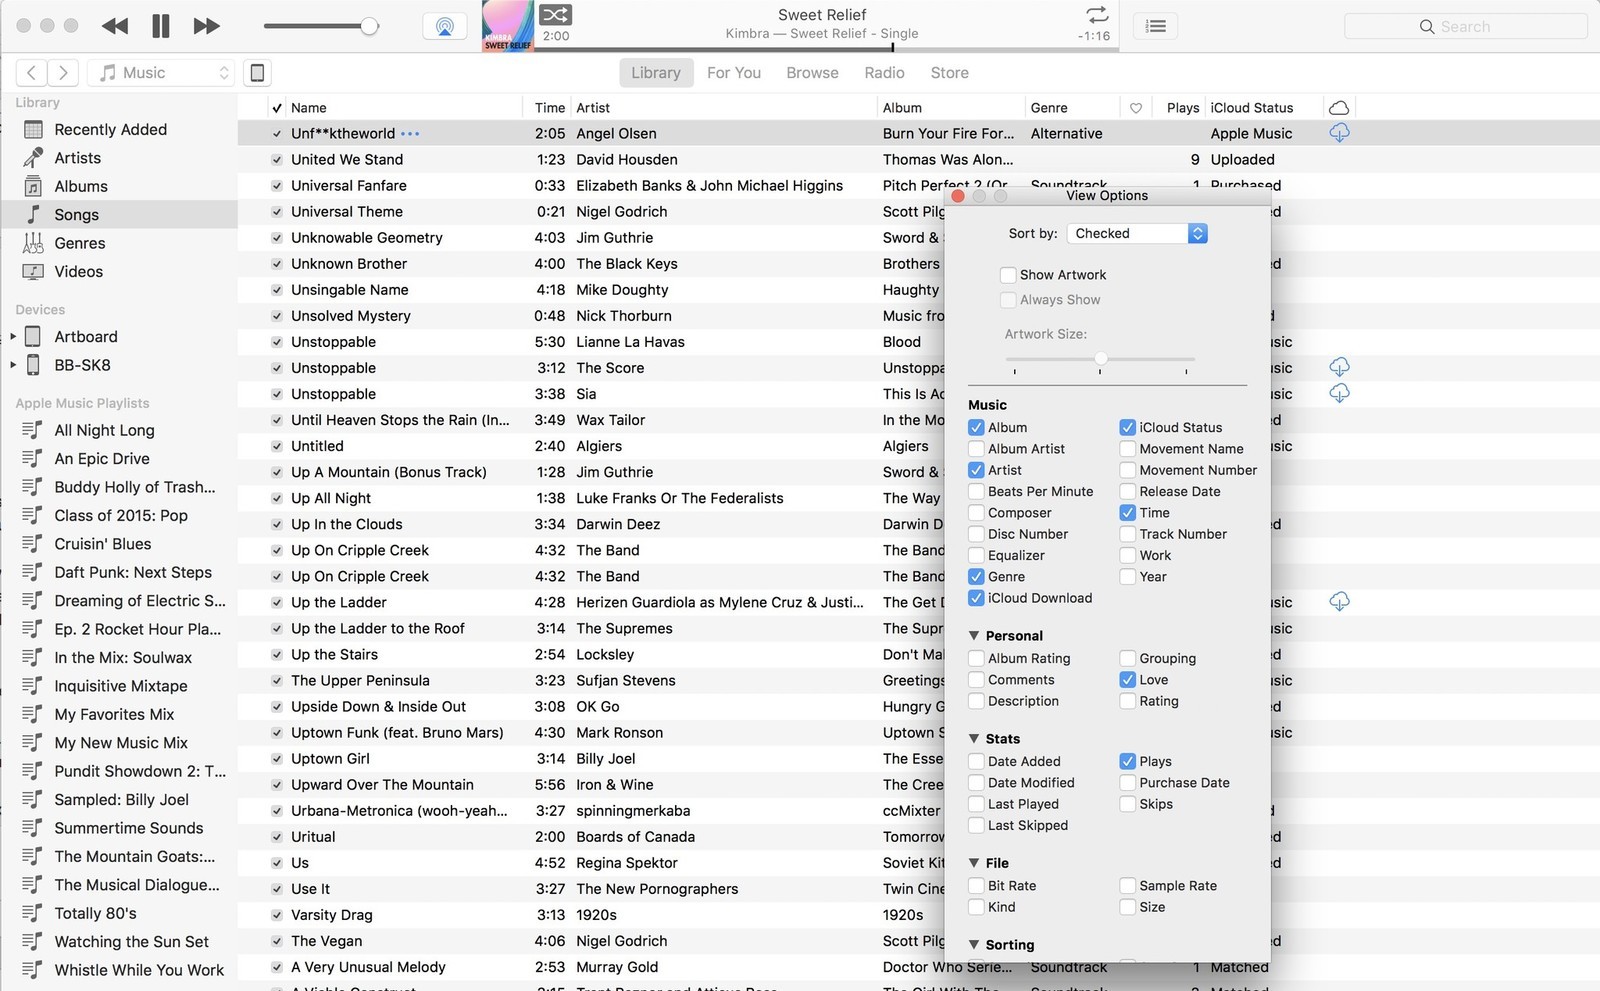 Download All Songs From Icloud To Mac